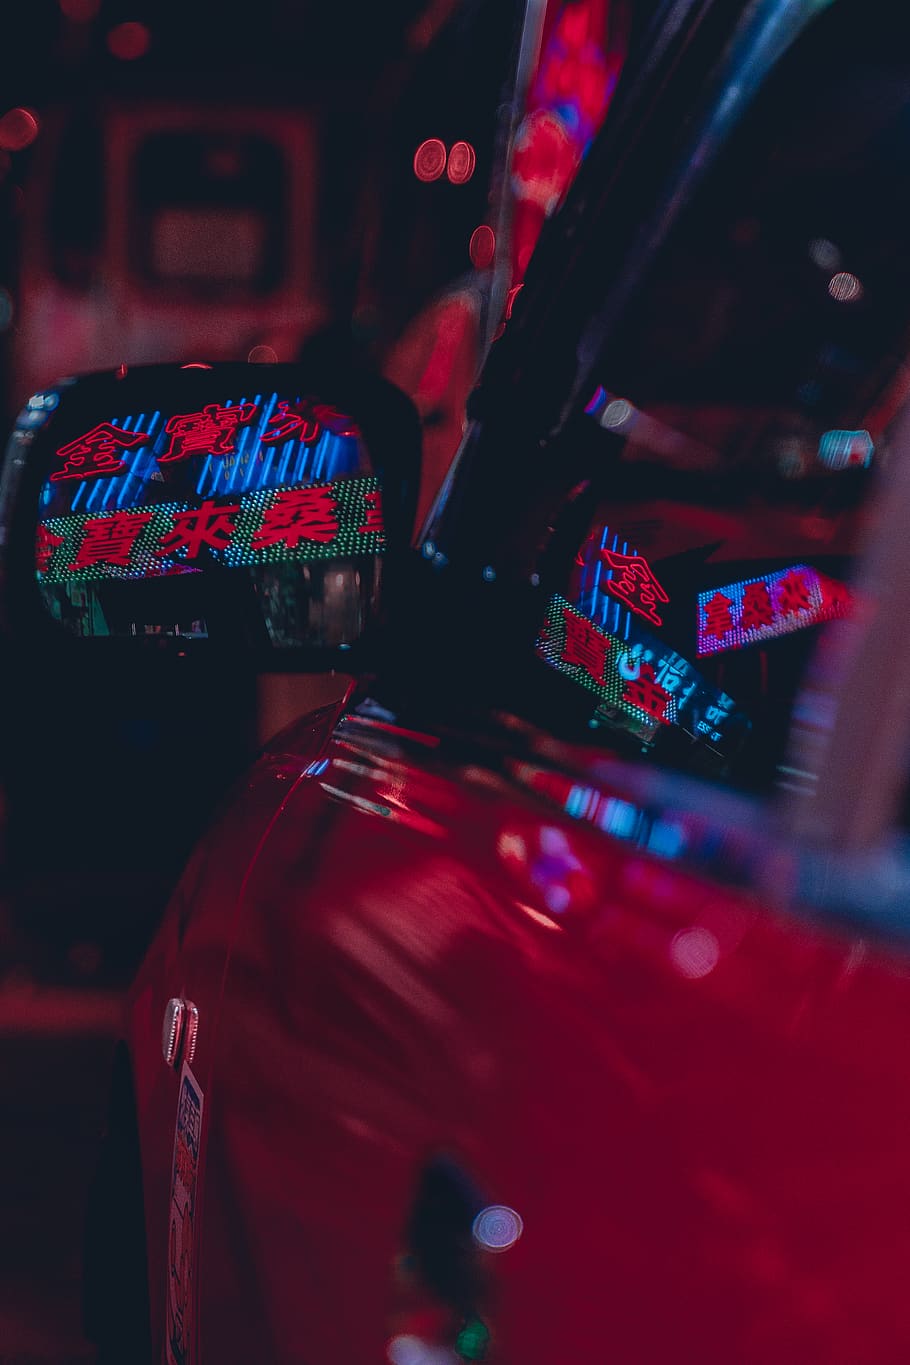 A red car with neon lights in the dark - Arcade